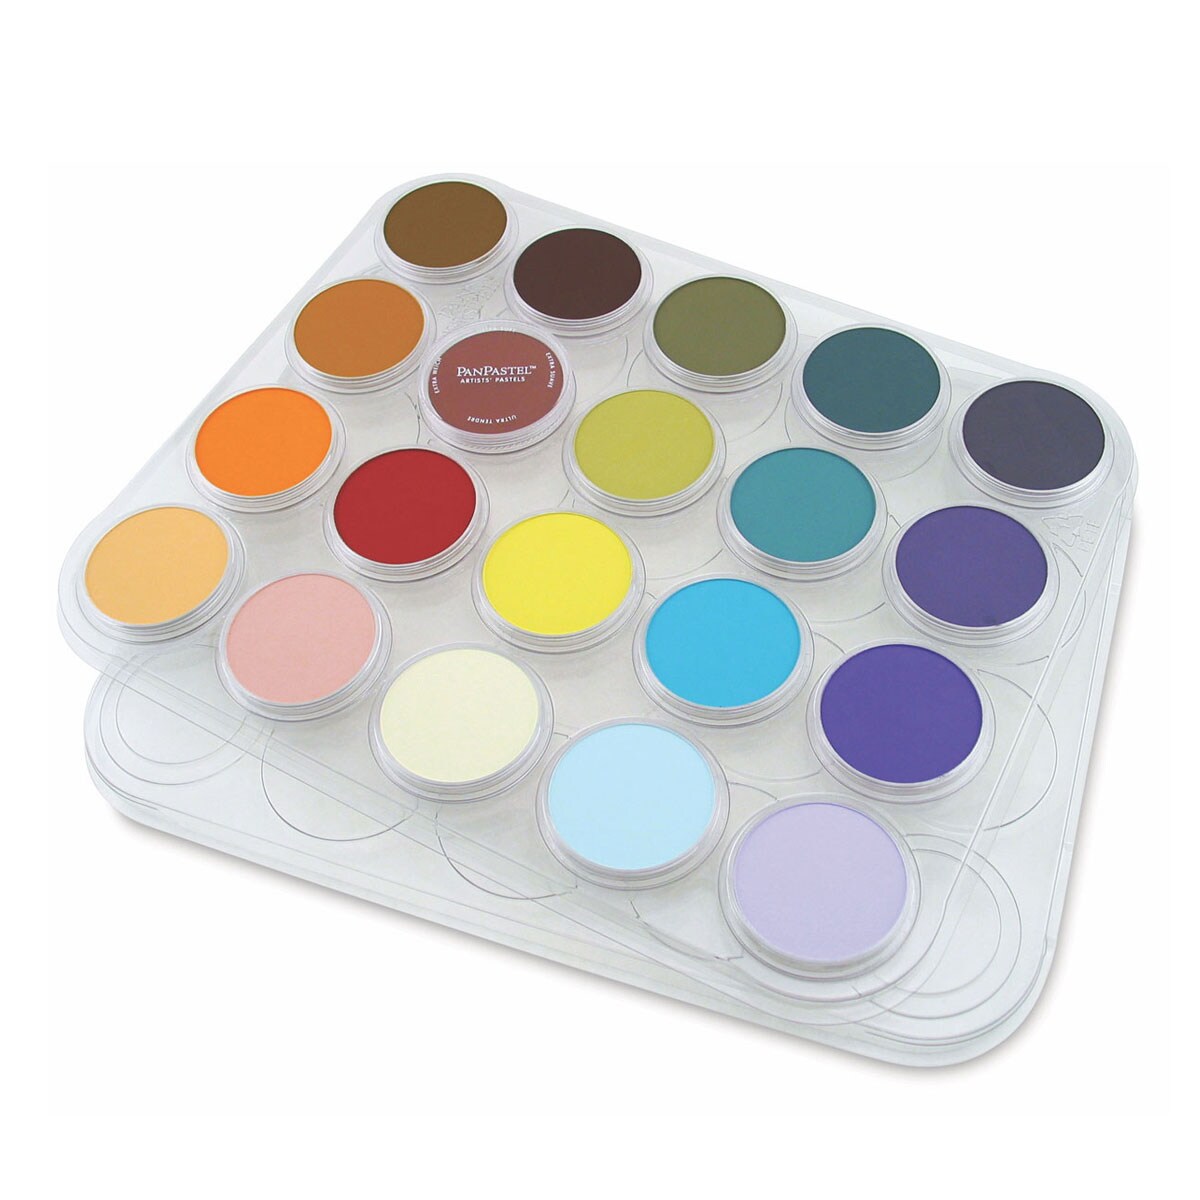 PanPastel Studio Palette Tray - Holds 20 Colors